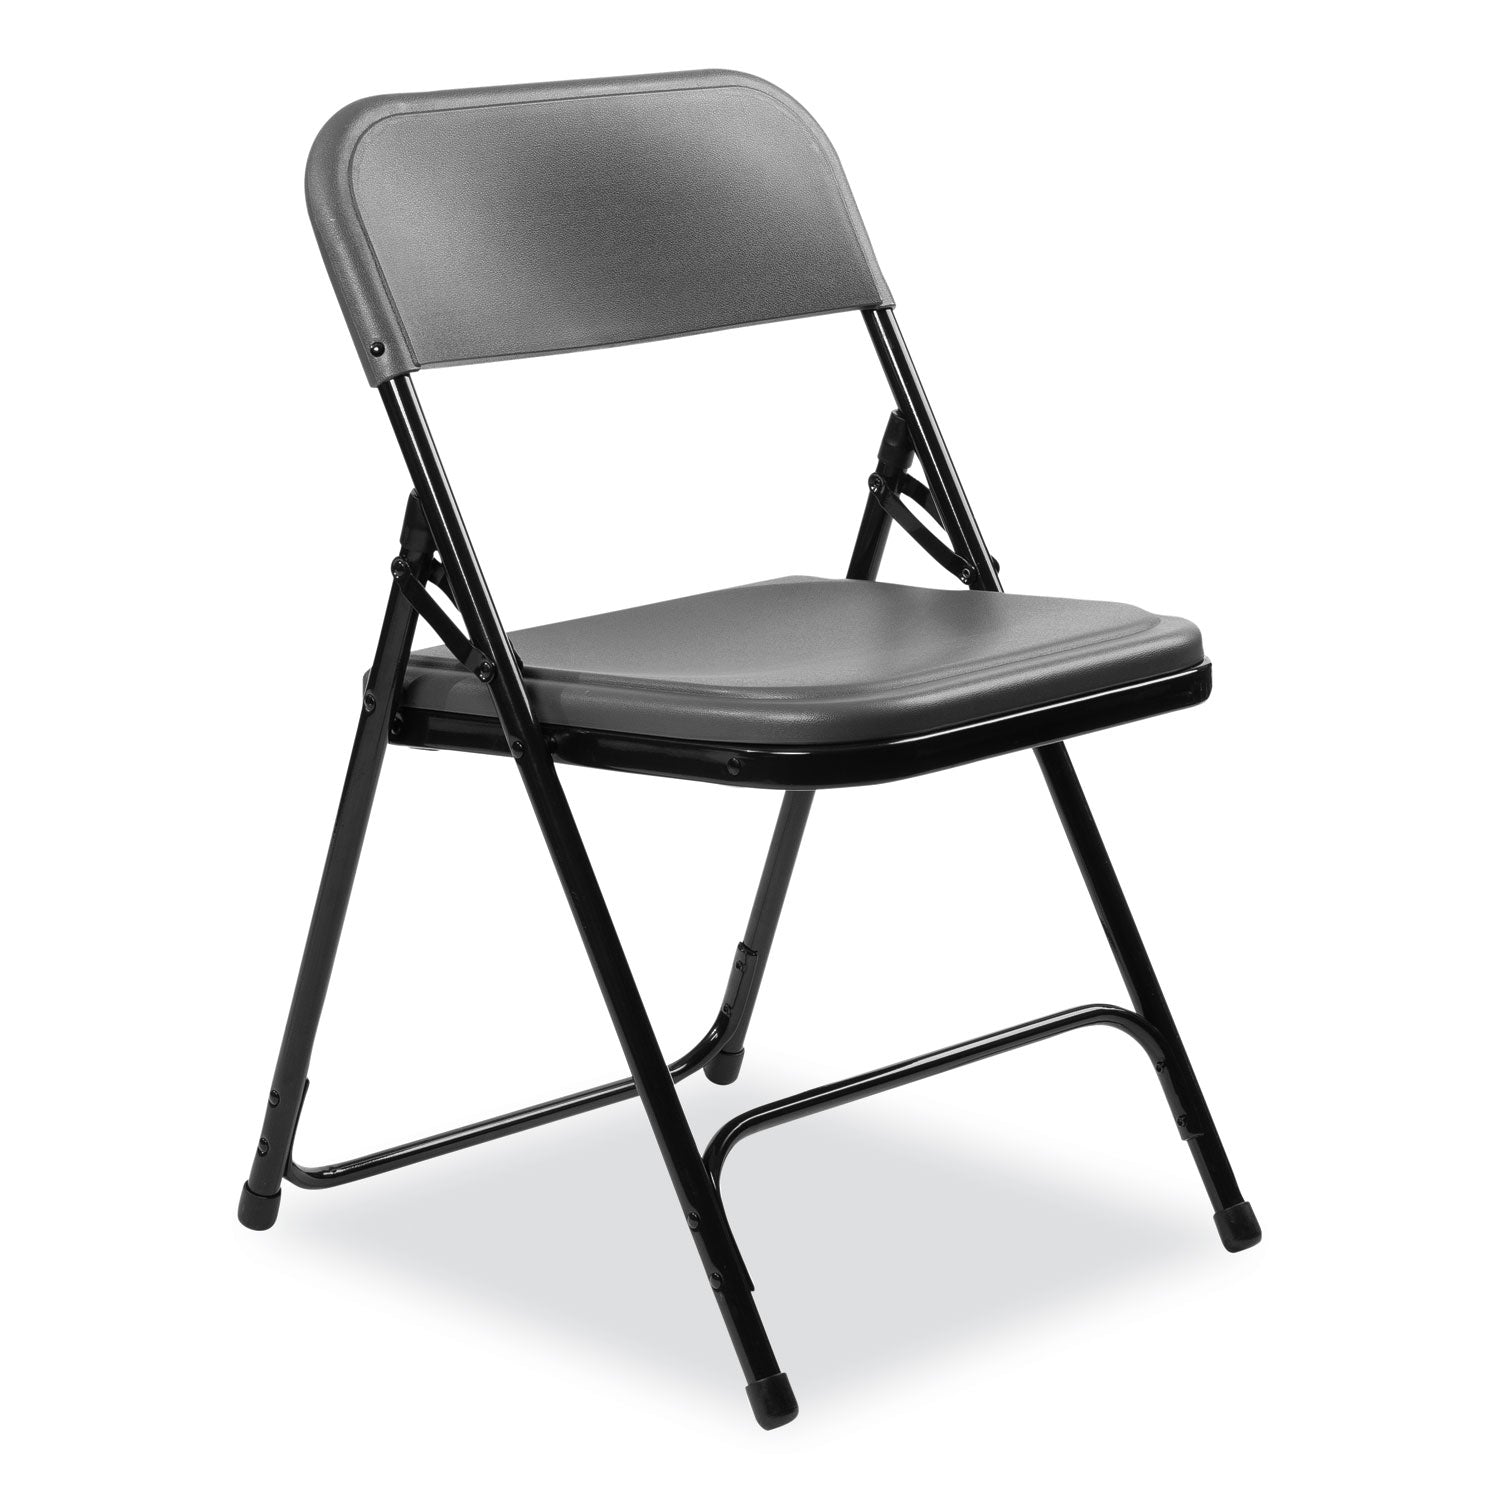 800-series-plastic-folding-chair-supports-500-lb-18-seat-ht-charcoal-seat-back-black-base-4-ct-ships-in-1-3-bus-days_nps820 - 2